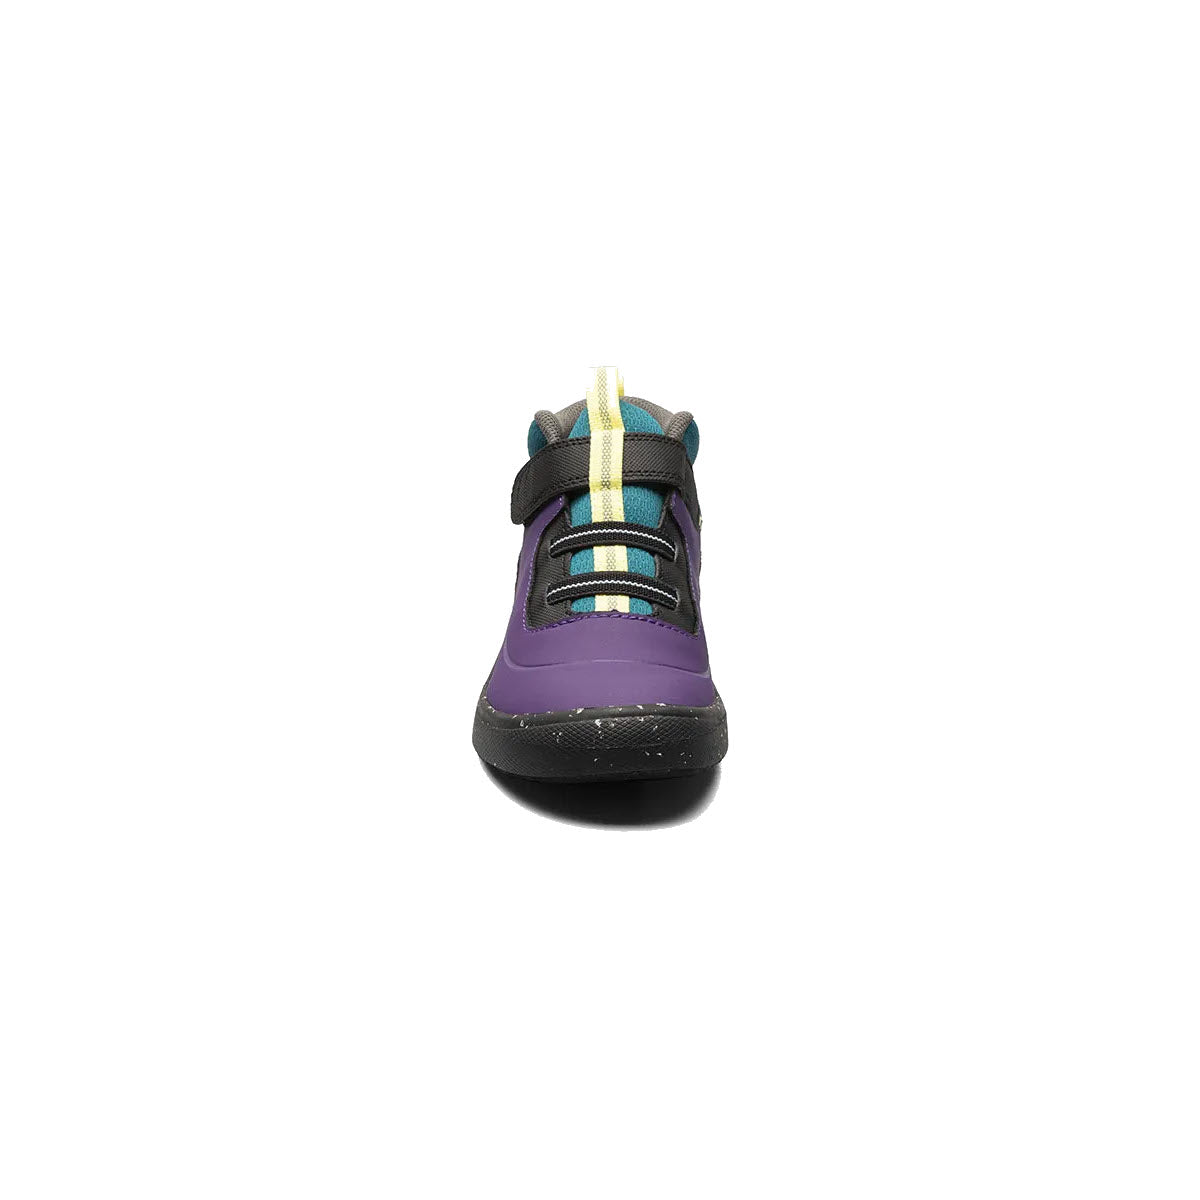 A single Bogs Skyline Kicker Mid Purple Multi - K child&#39;s shoe with a purple top, black sole, and multicolored laces featuring a hook and loop closure, viewed from the front on a white background.